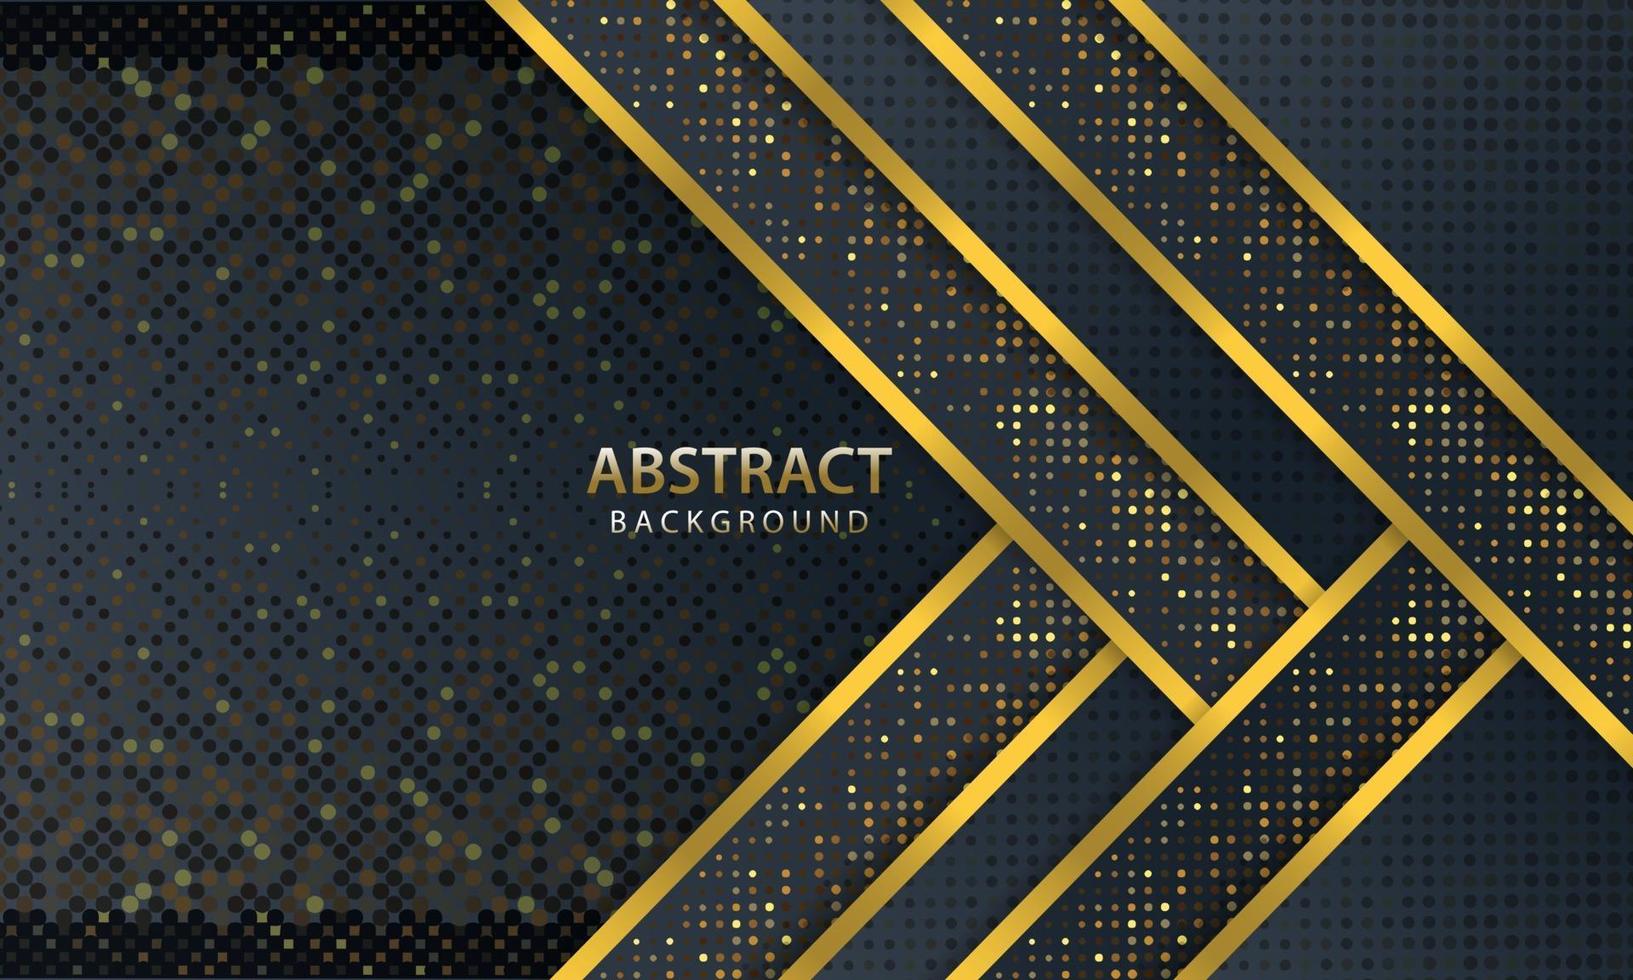 Abstract dark background with gold line design modern. vector illustration.